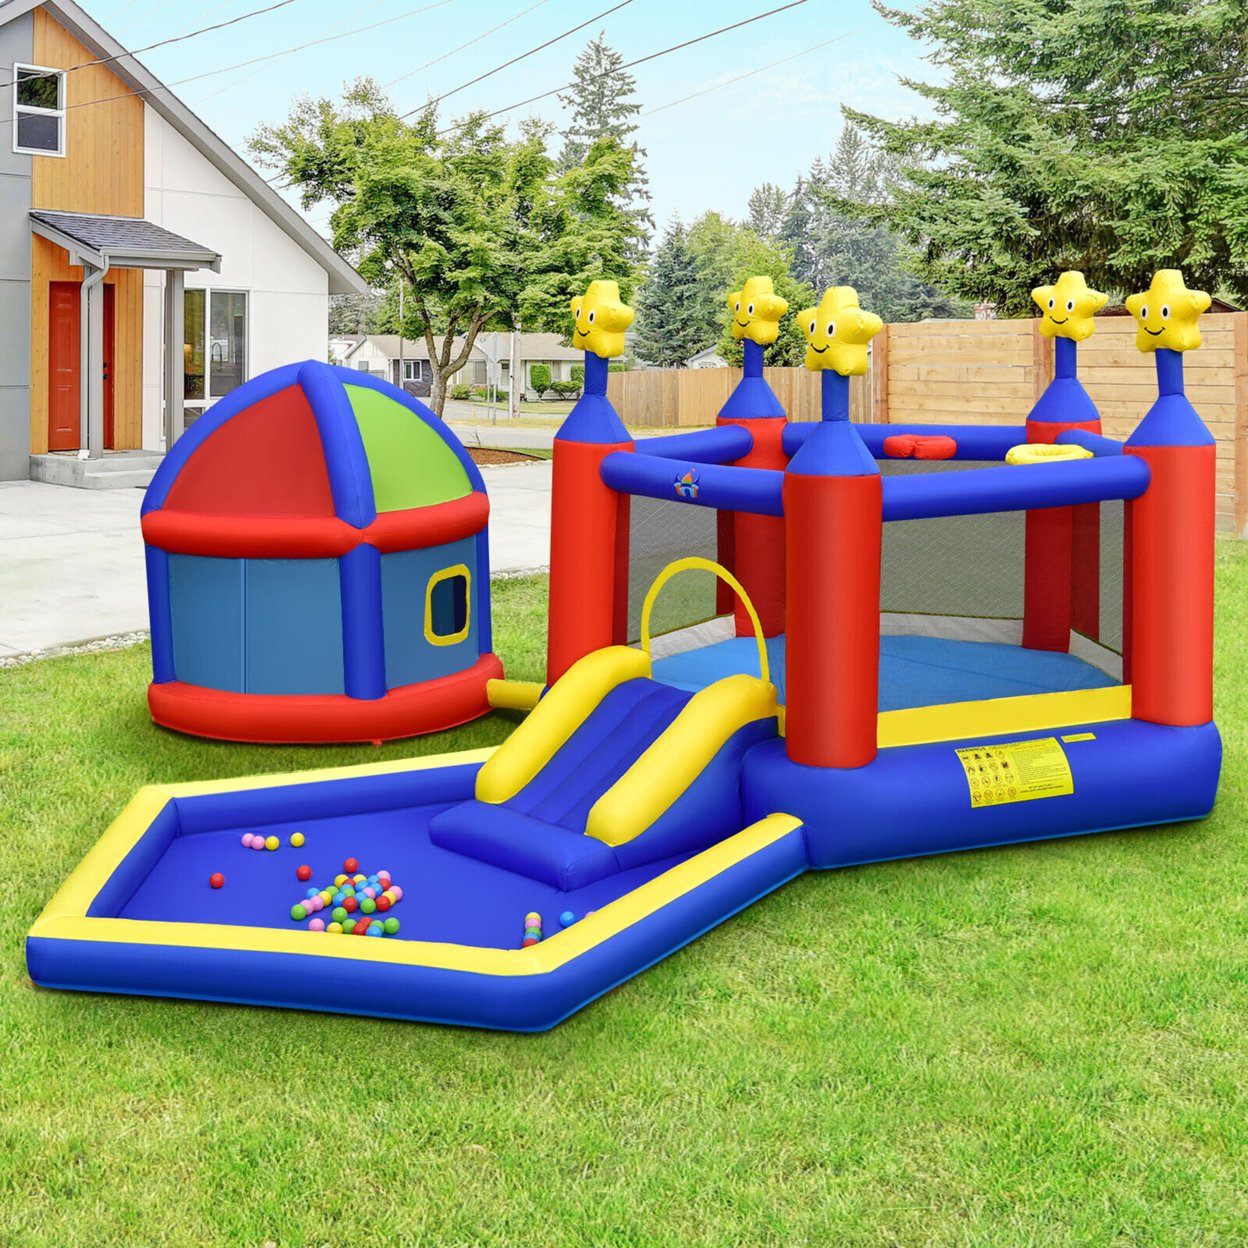 Kids Inflatable Bouncy Castle W/Slide Large Jumping Area Playhouse & 735W Blower